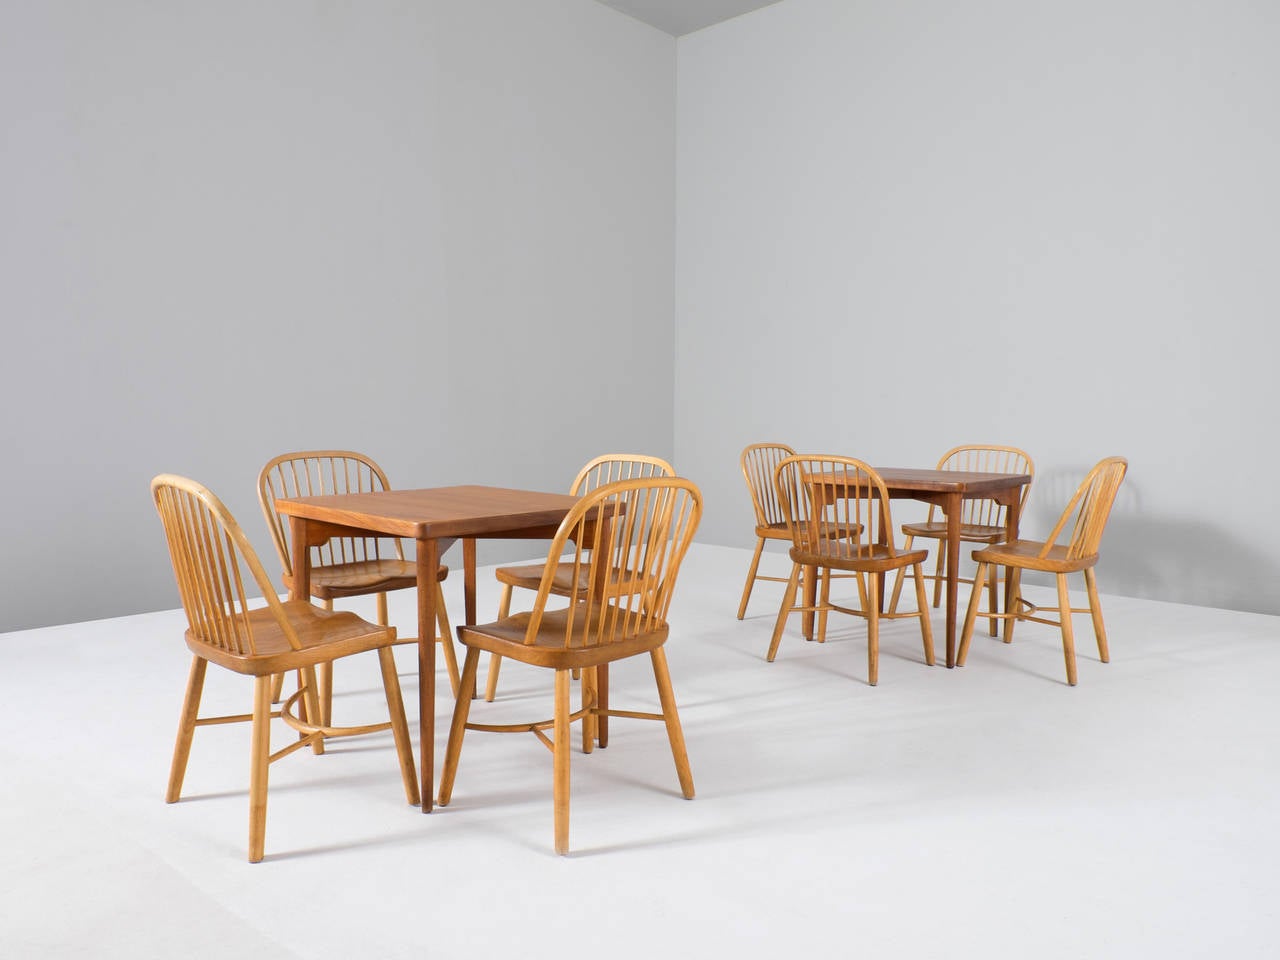 Two Scandinavian dining sets. The chairs are made of beech and the seats of solid teak. The tables are made of teak. Designed by Palle Suenson, originally produced by Fritz Hansen. 

Made in the 1940s under architectural accompaniment for the city